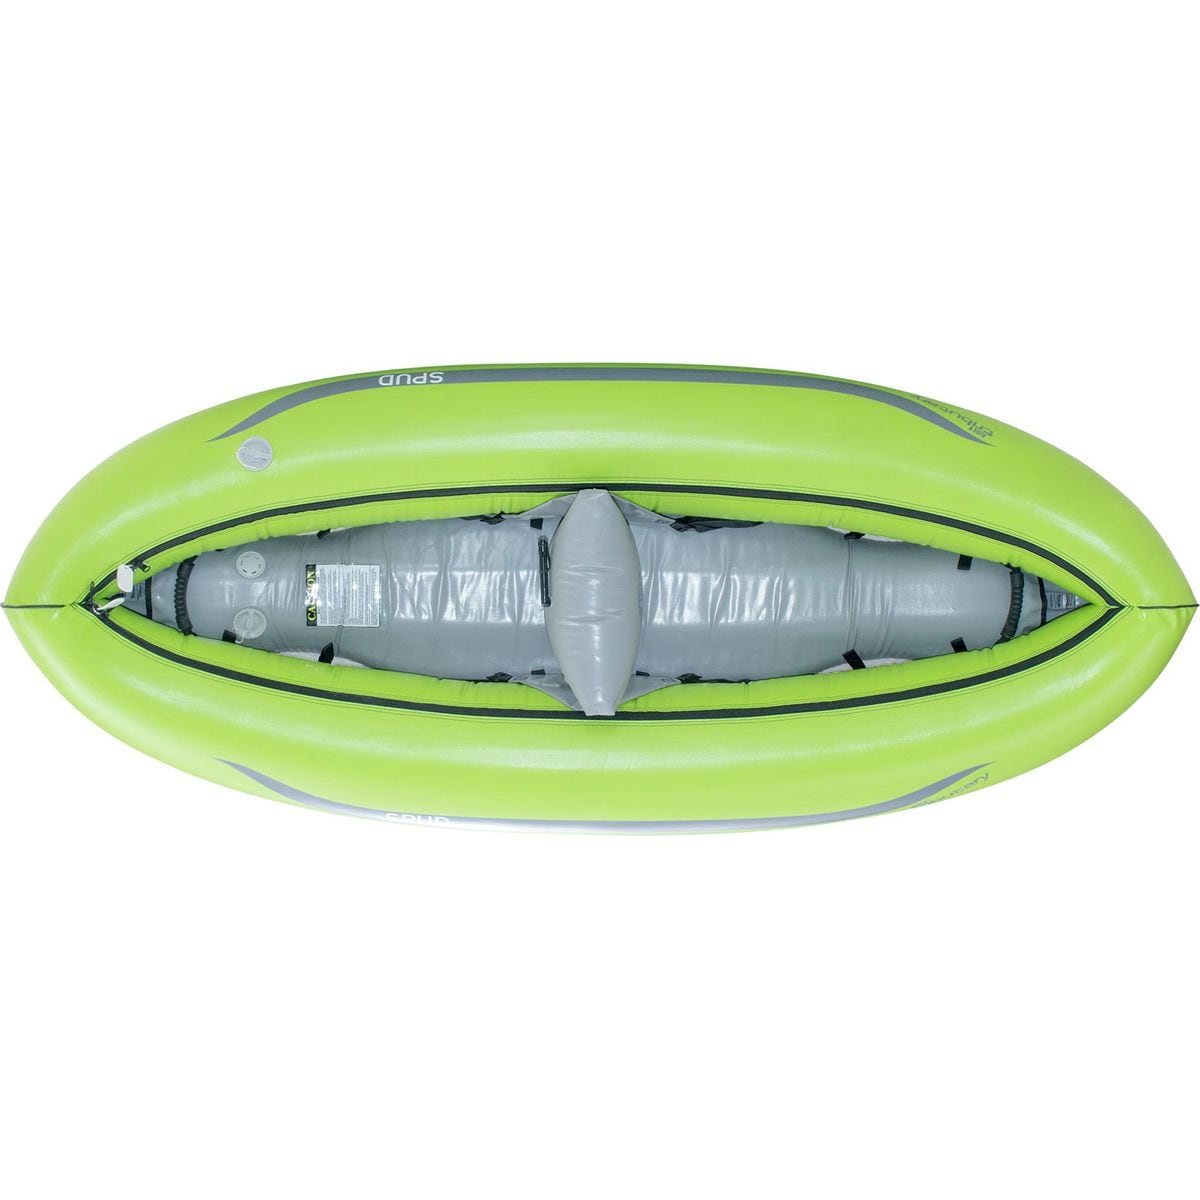 Aire Tributary SPUD Inflatable Kayak